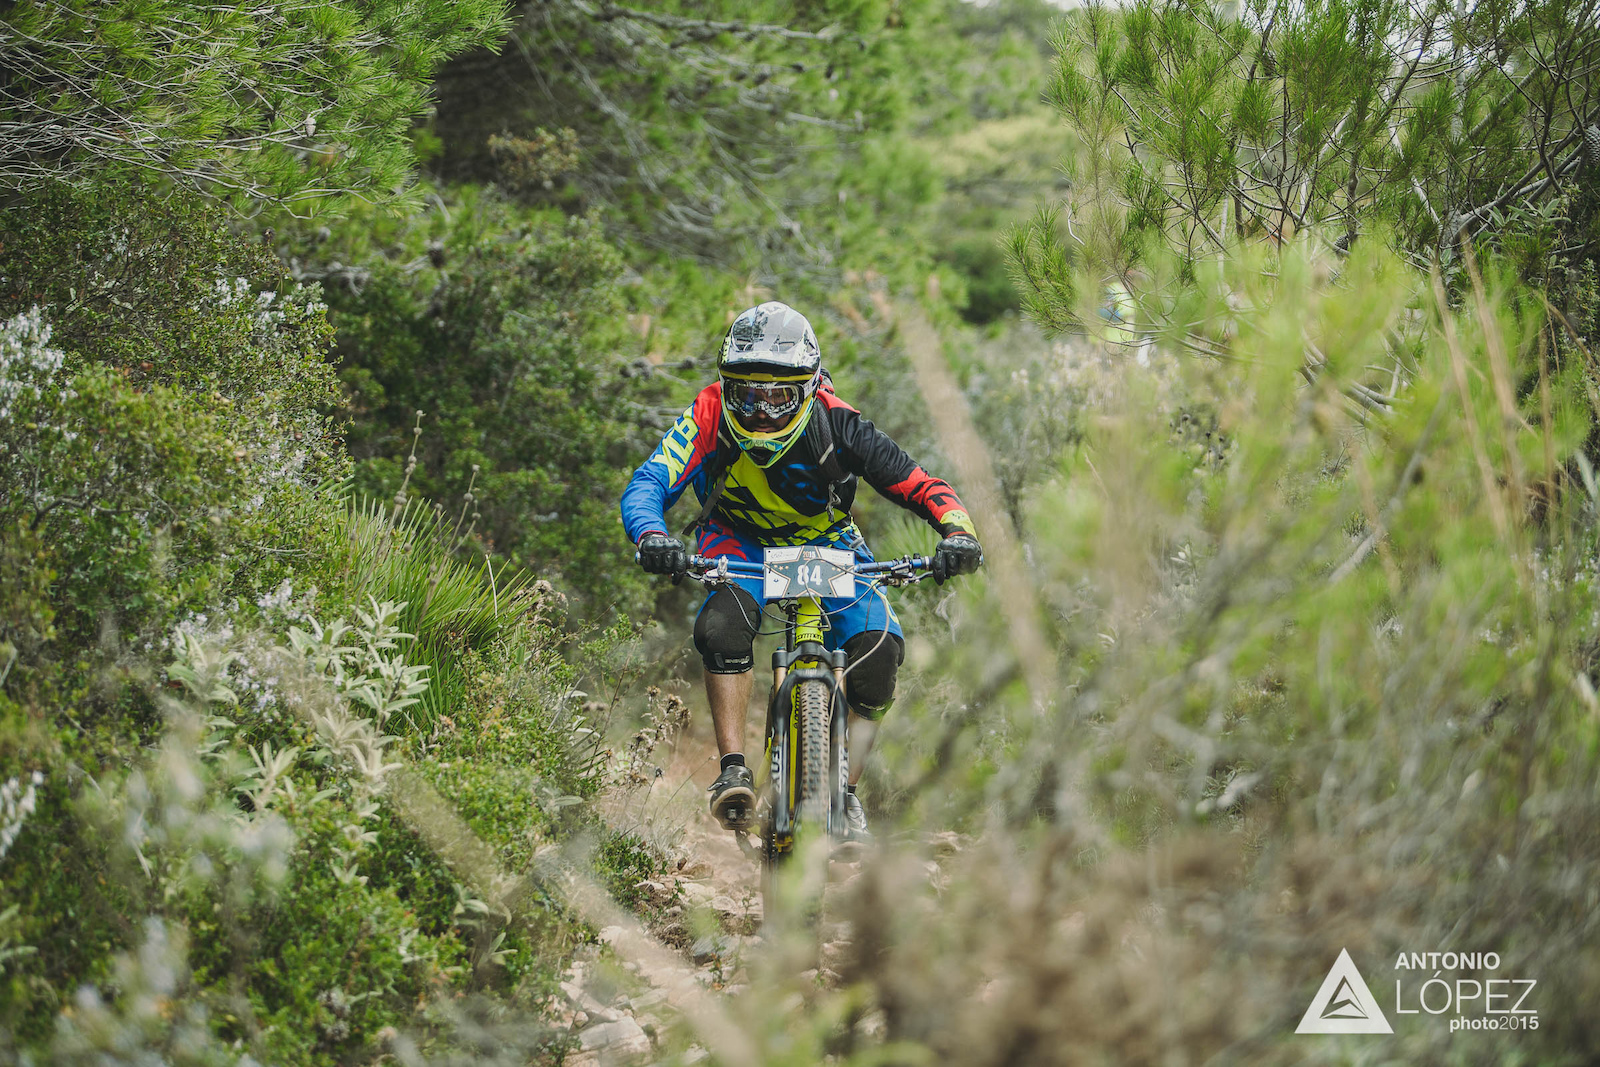 Mueller Marcos from Germany races down  stage 4 for during the practice for the 5th stop of the European Enduro Series at Malaga / Benalmadena, Spain, on October 17, 2015. Free image for editorial usage only: Photo by Antonio Lopez